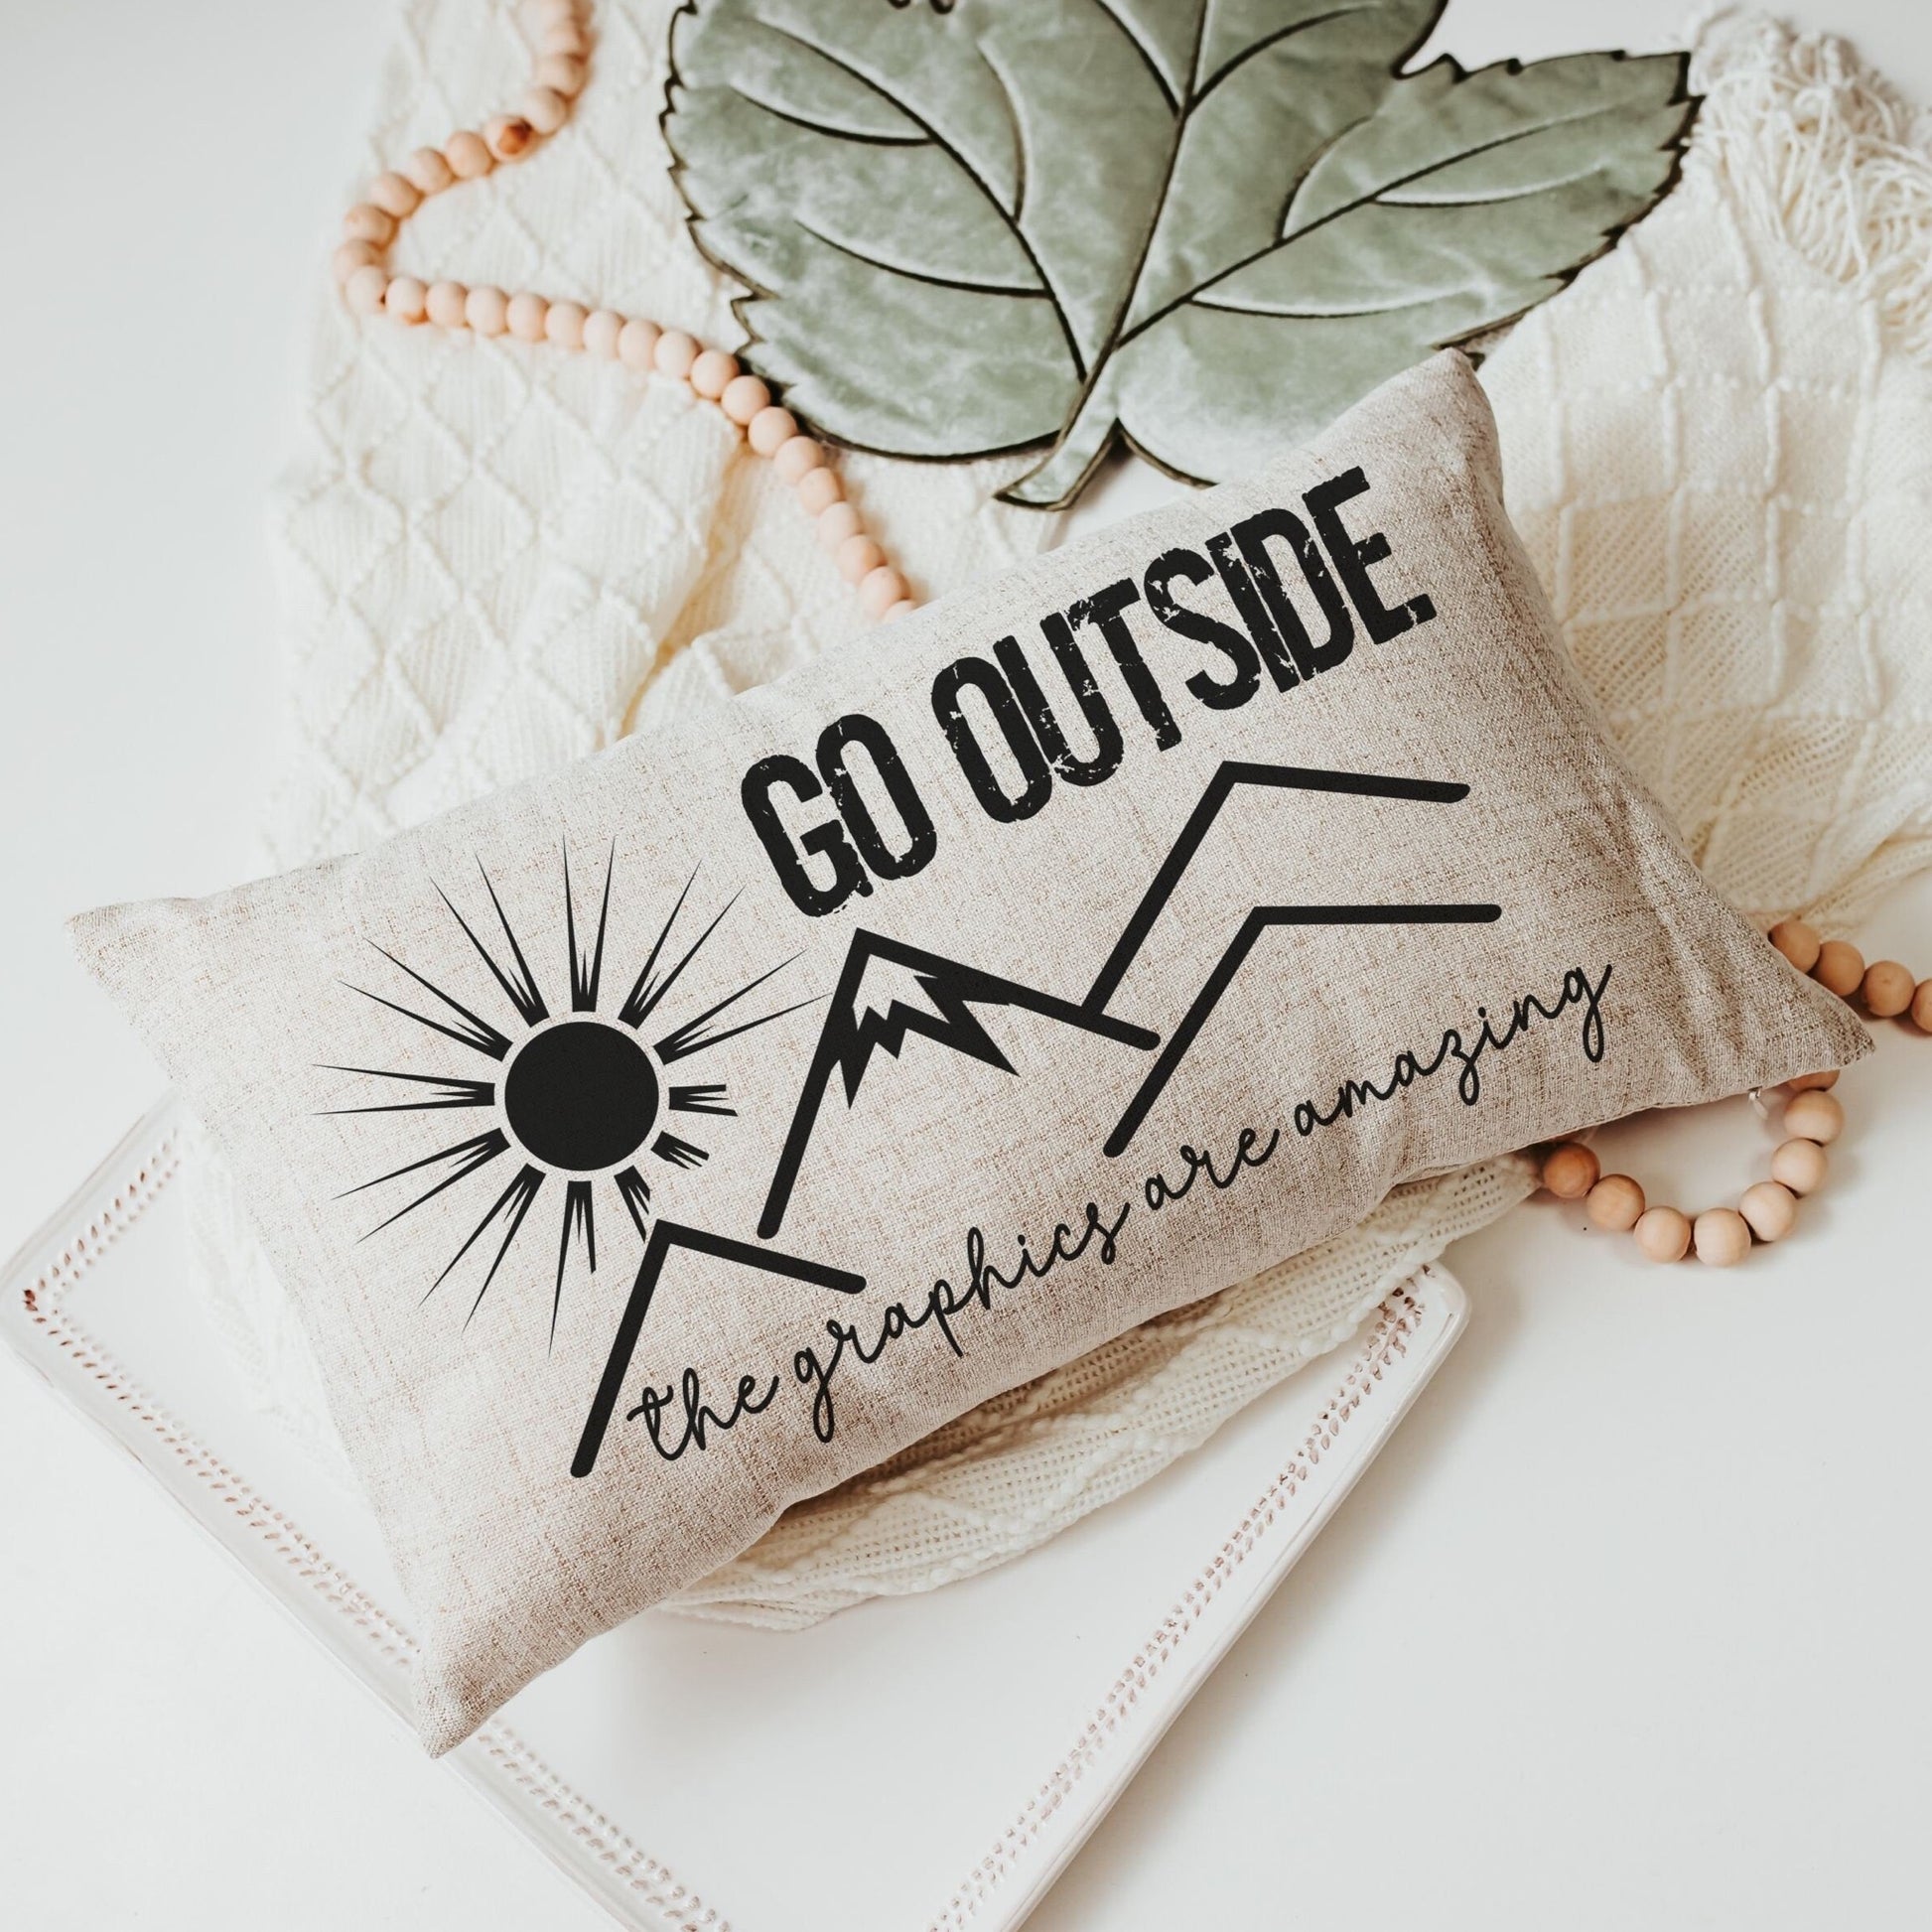 Go Outside The Graphics Are Amazing Lumbar Throw Pillows